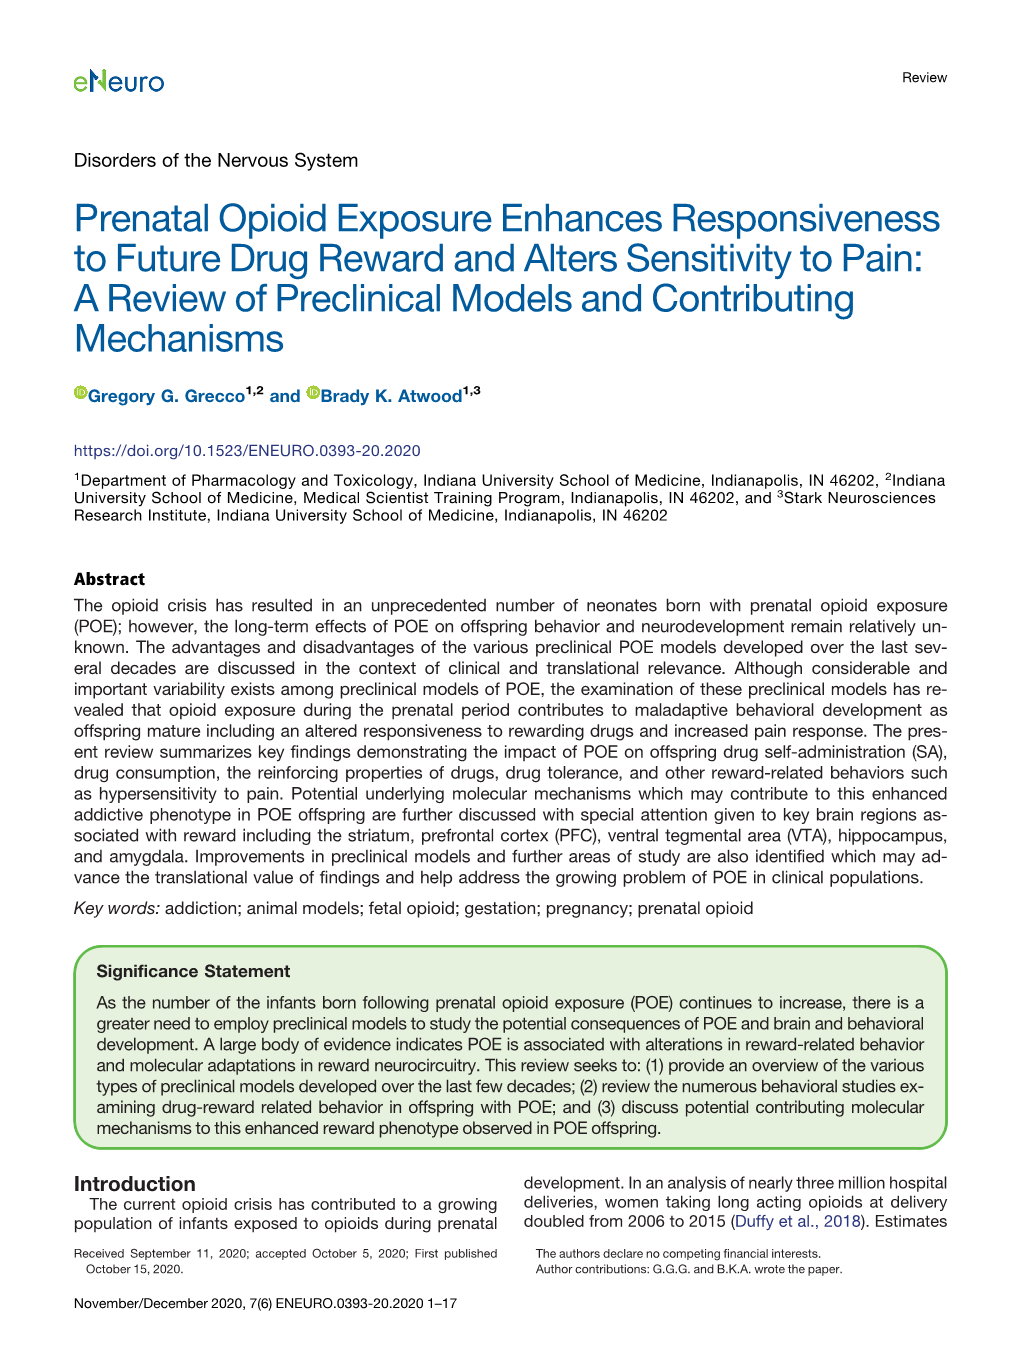 Prenatal Opioid Exposure Enhances Responsiveness to Future Drug Reward and Alters Sensitivity to Pain: a Review of Preclinical Models and Contributing Mechanisms